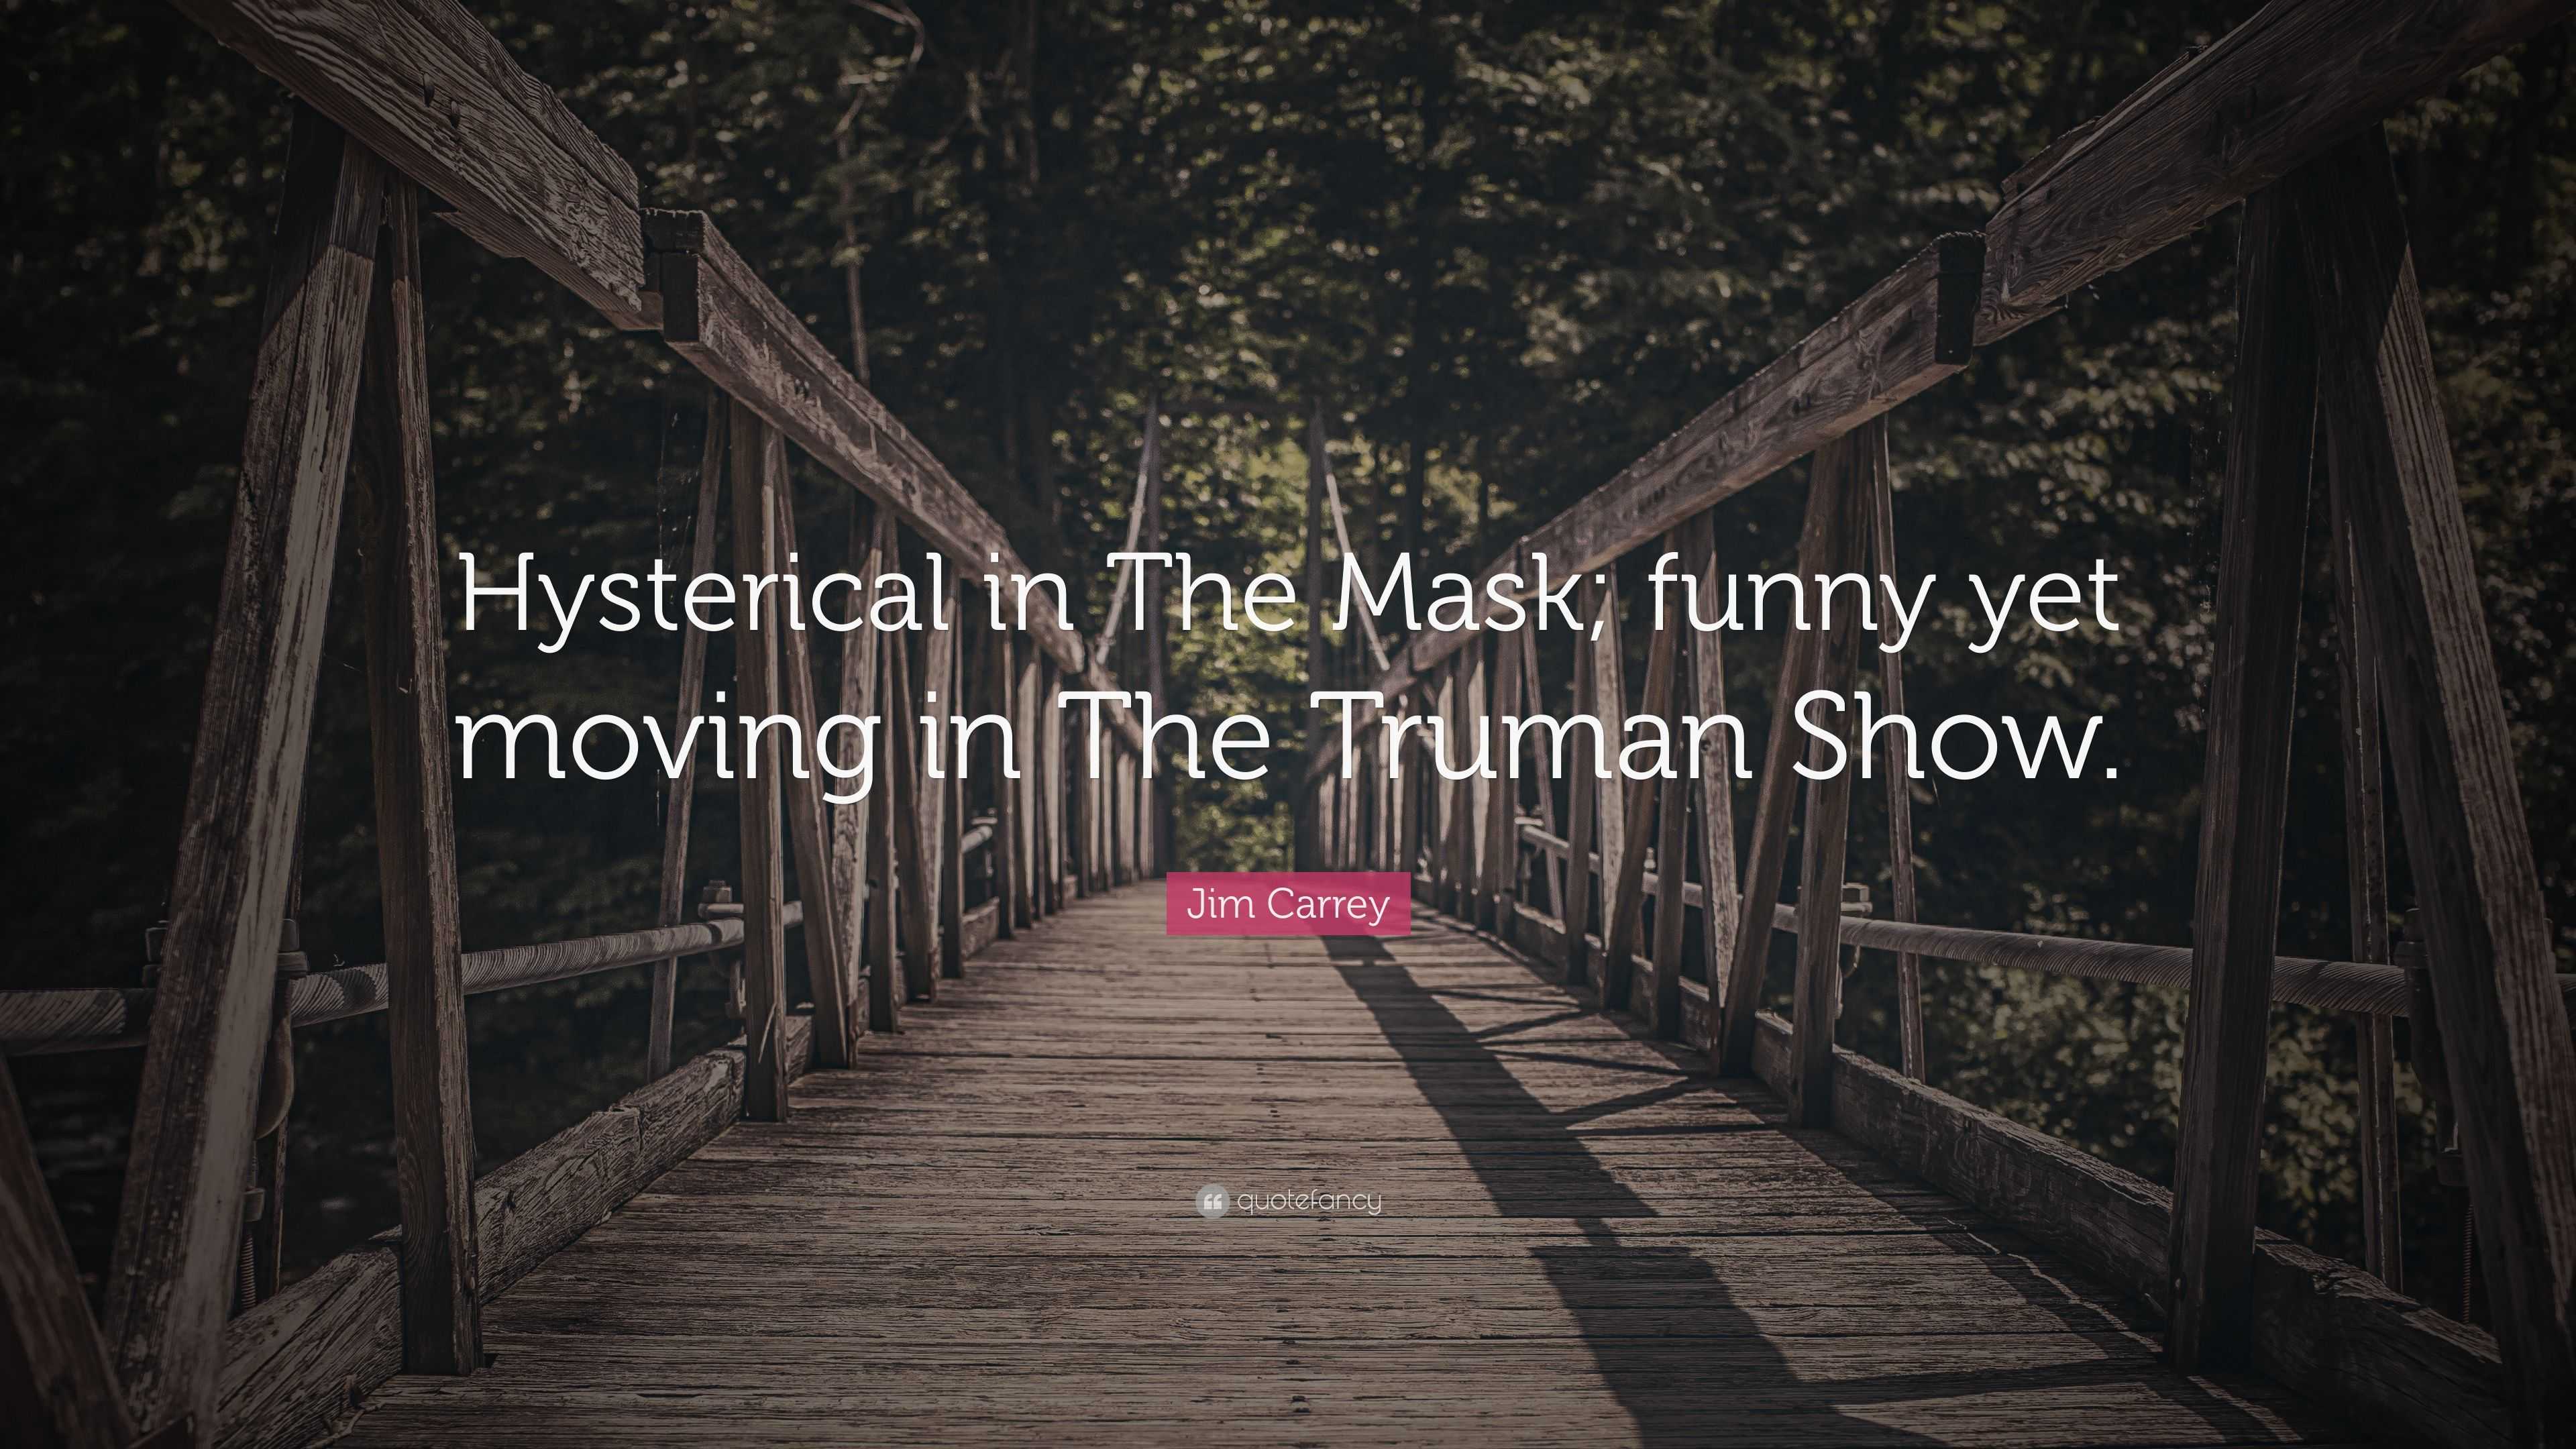 Jim Carrey Quote: “Hysterical in The Mask; funny yet moving in The Truman  Show.”